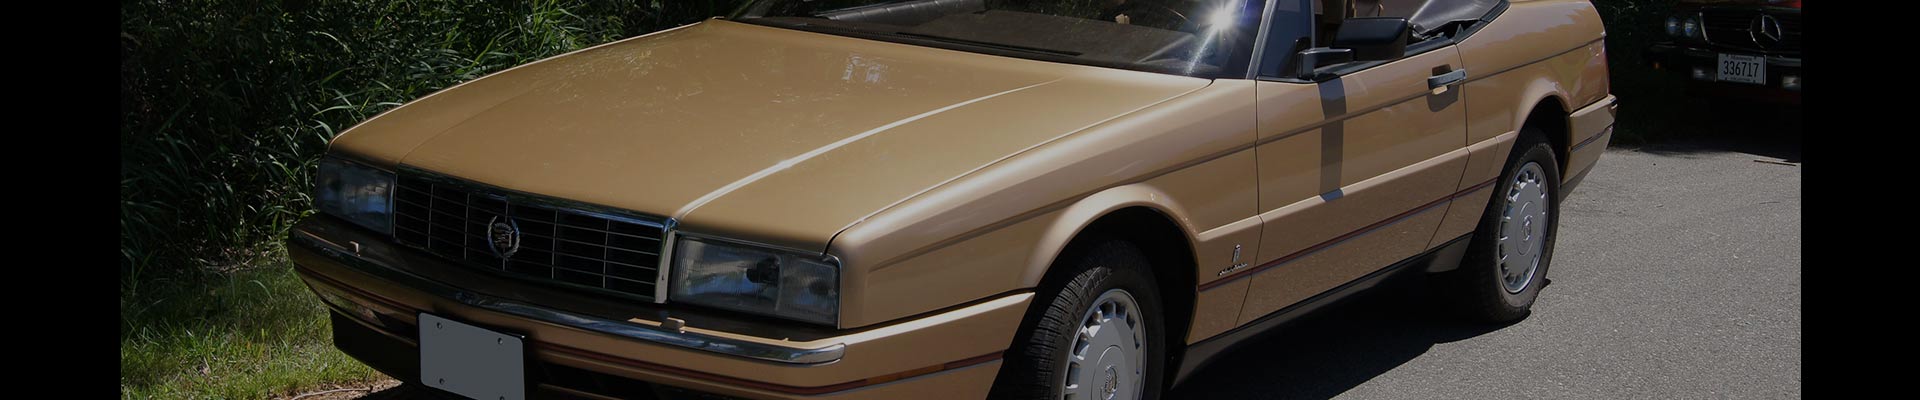 Shop Replacement and OEM 1989 Cadillac Allante Parts with Discounted Price on the Net